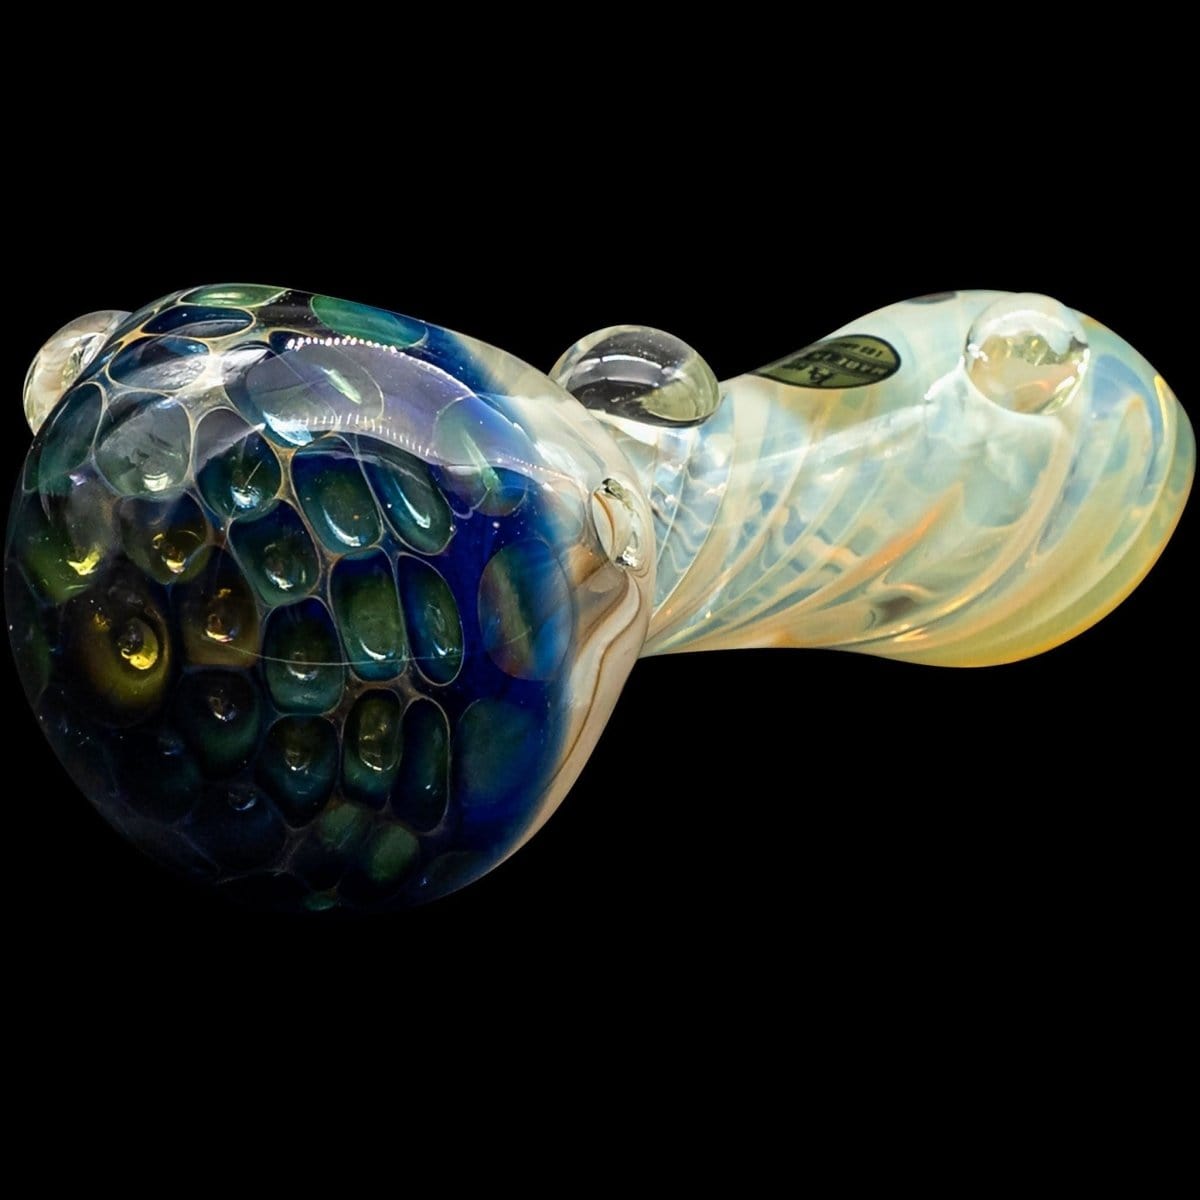 LA Pipes Hand Pipe "The Hive" Honeycomb Color Changing Glass Pipe